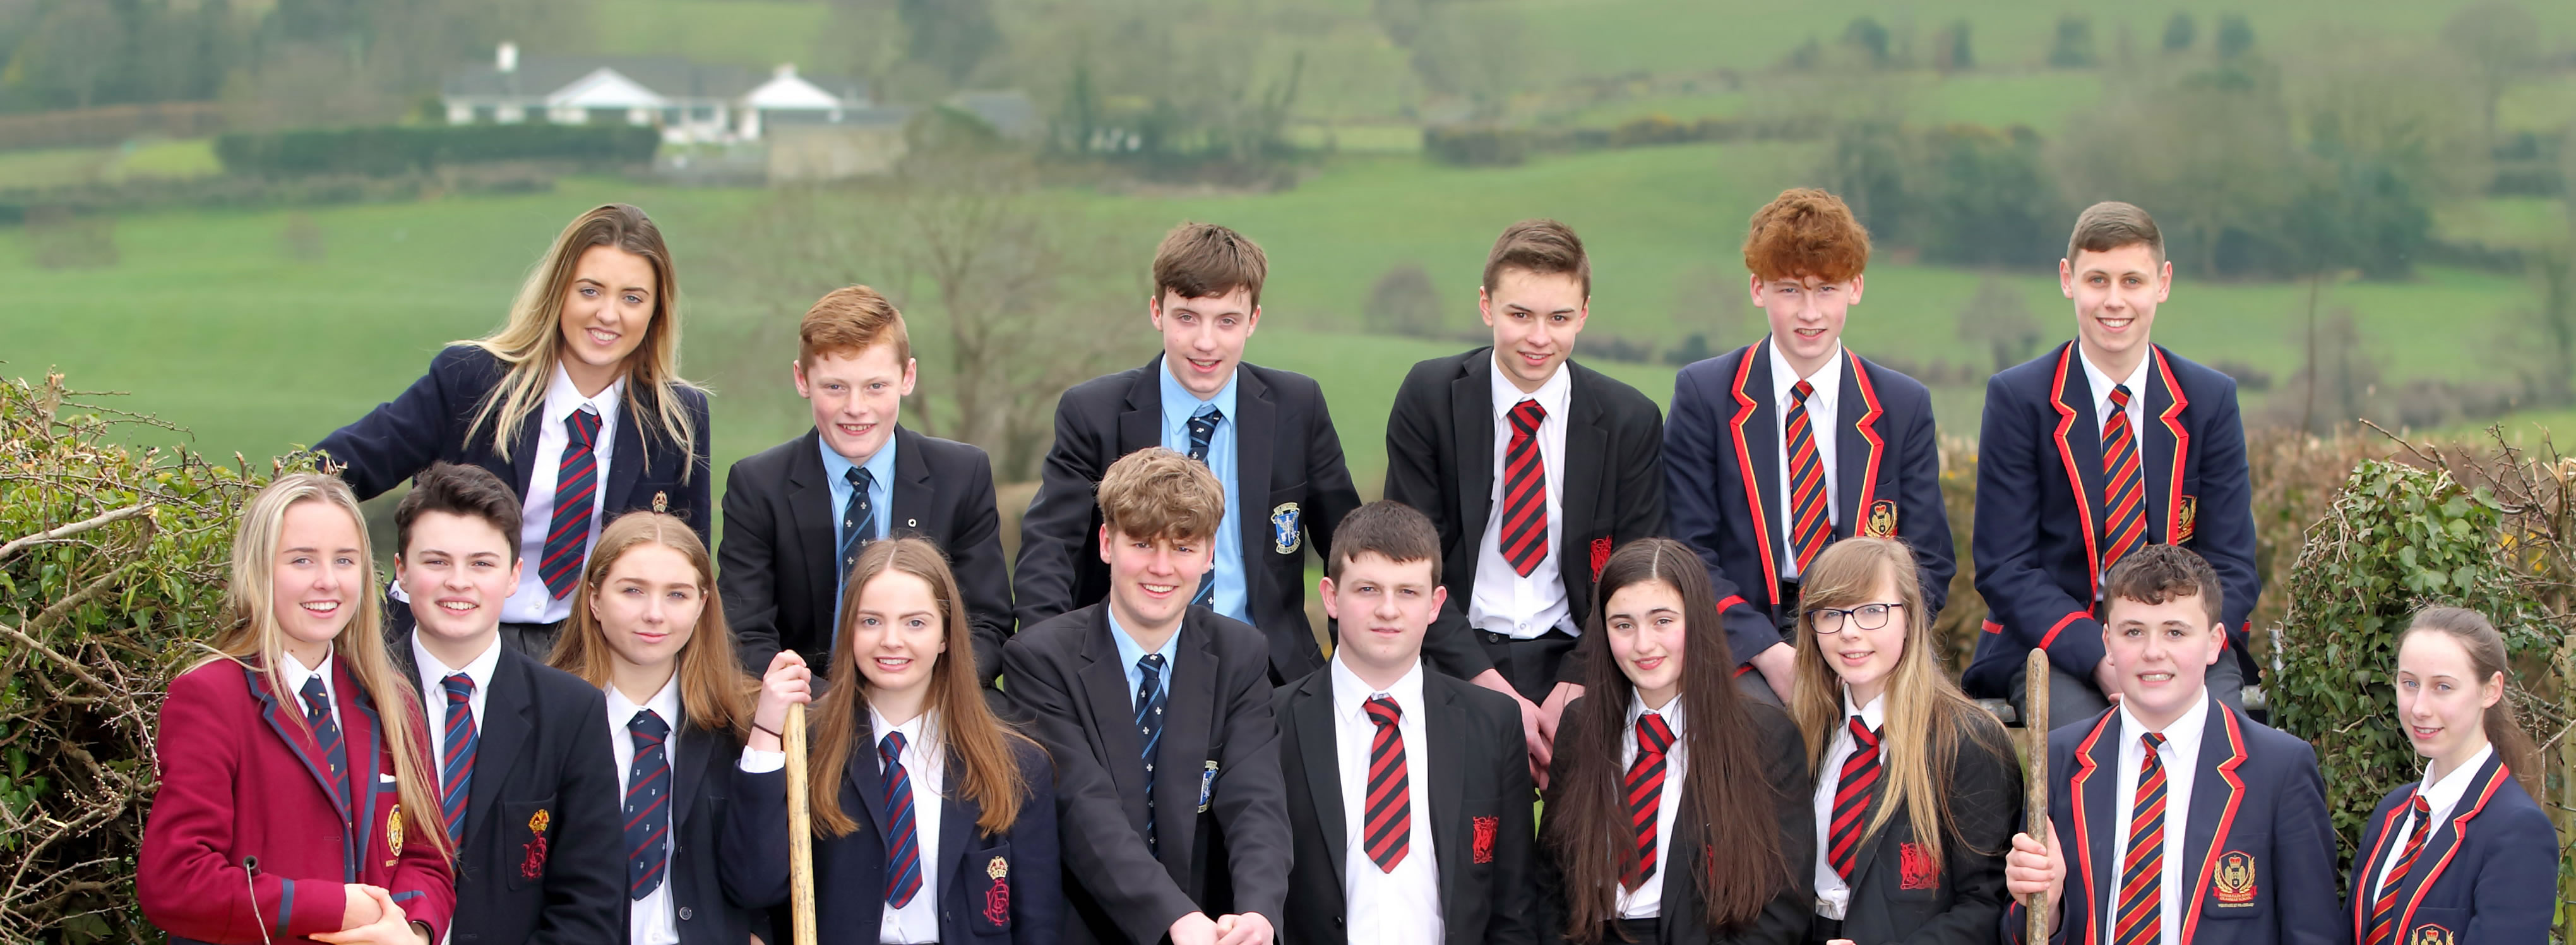 FOUR SCHOOLS ANNOUNCED AS ABP ANGUS YOUTH CHALLENGE FINALISTS 2018